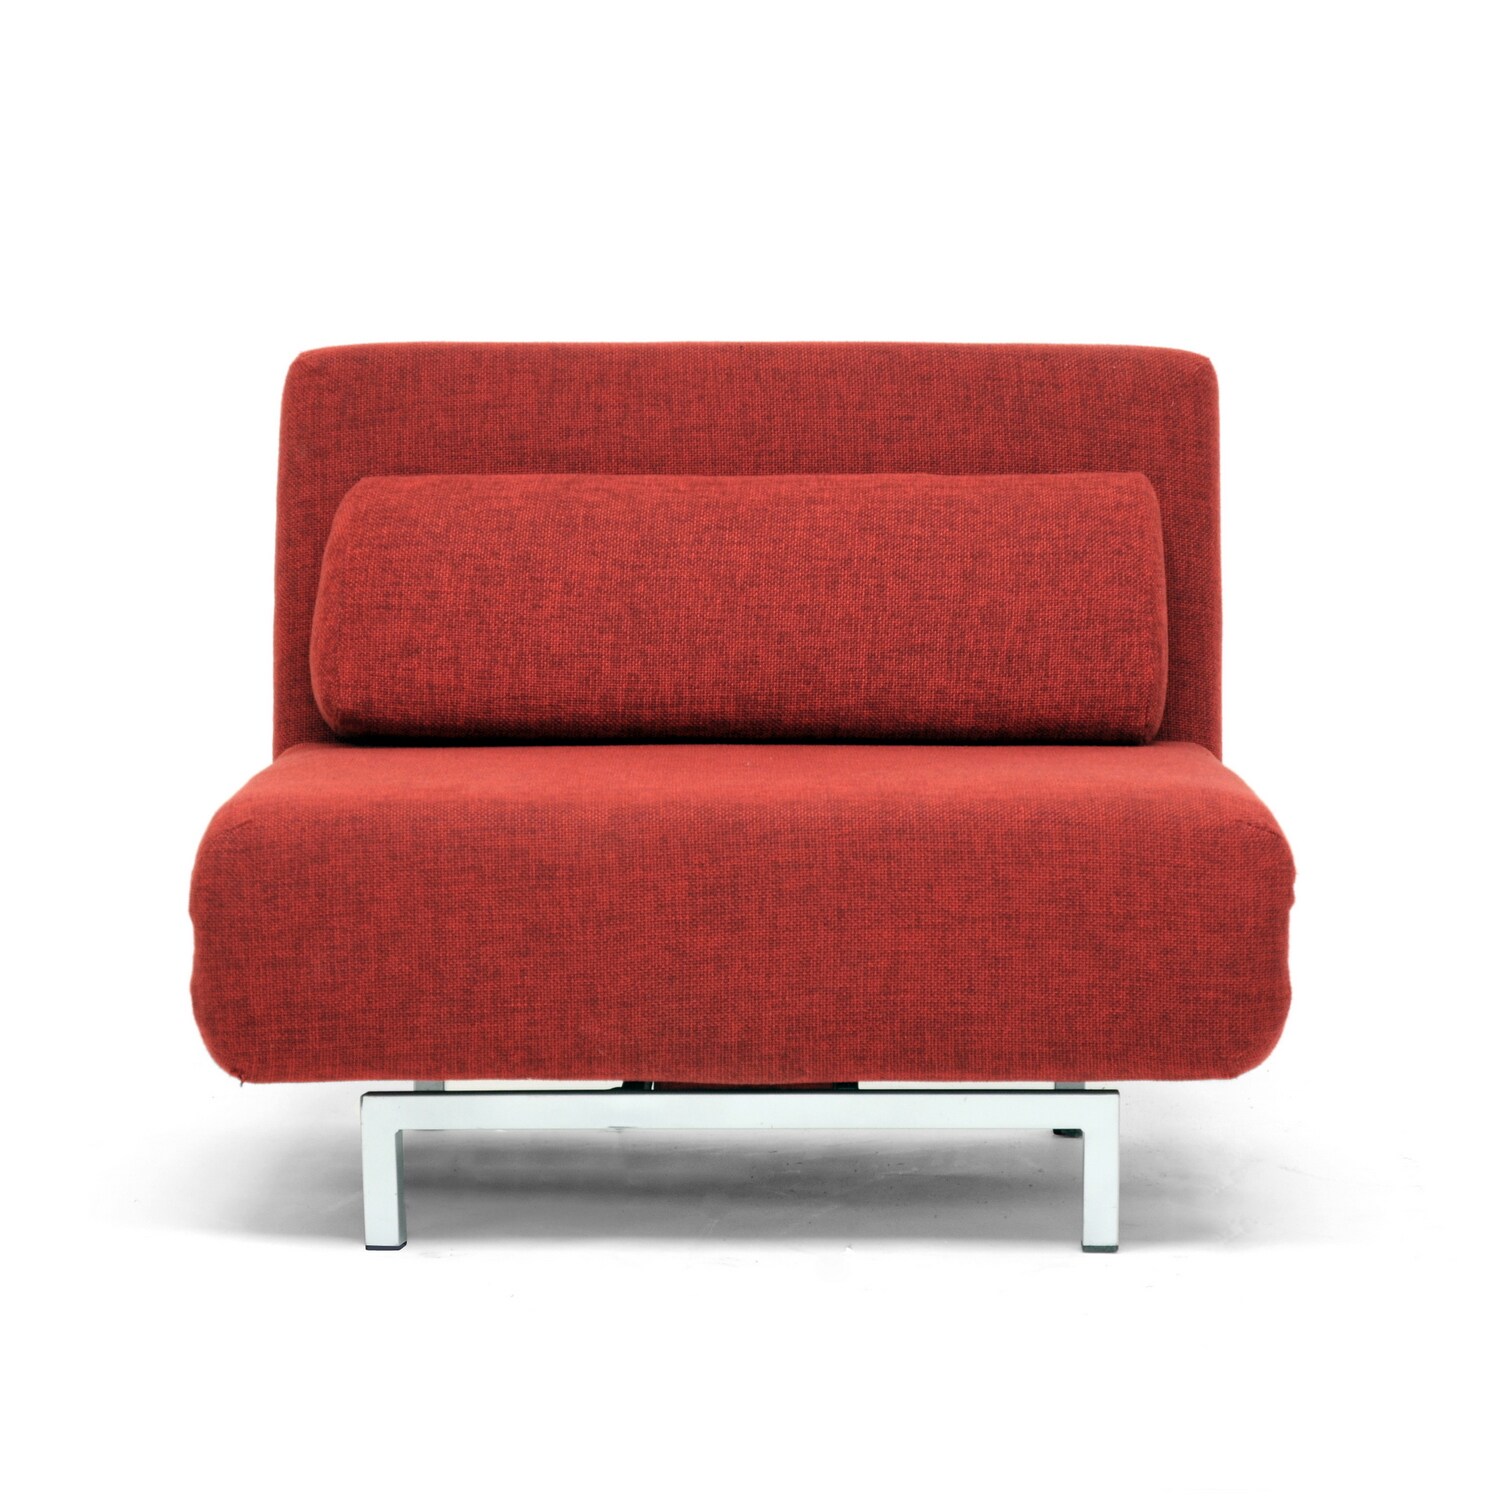 Baxton Studio Red Contemporary/Modern Polyester Futon at Lowes.com